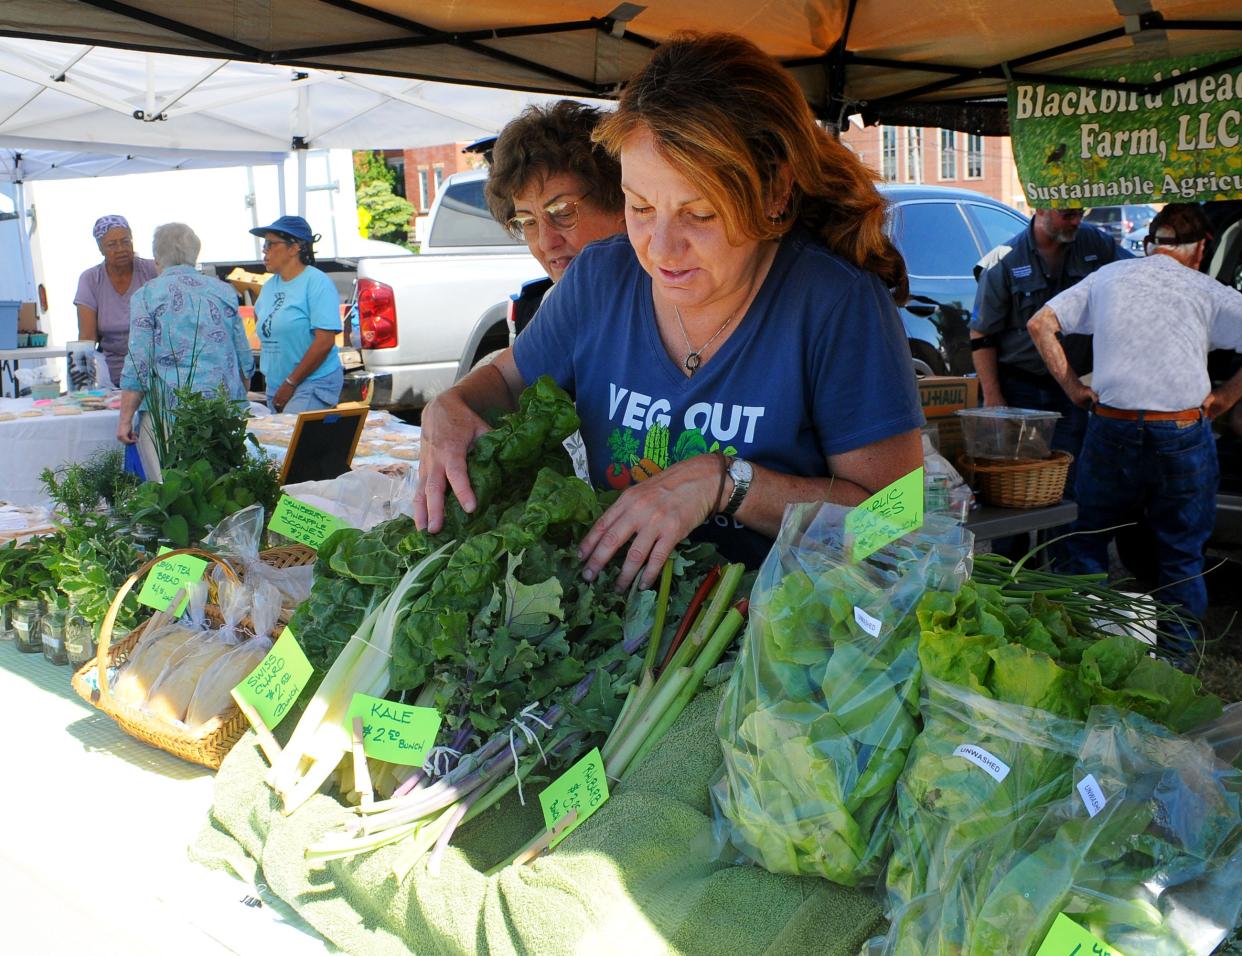 Betsy Libby arranges kale Saturday, June 25, 2022, at the Blackbird Meadows Farm vegetable stand on the opening day of the Alliance Farmers Market.